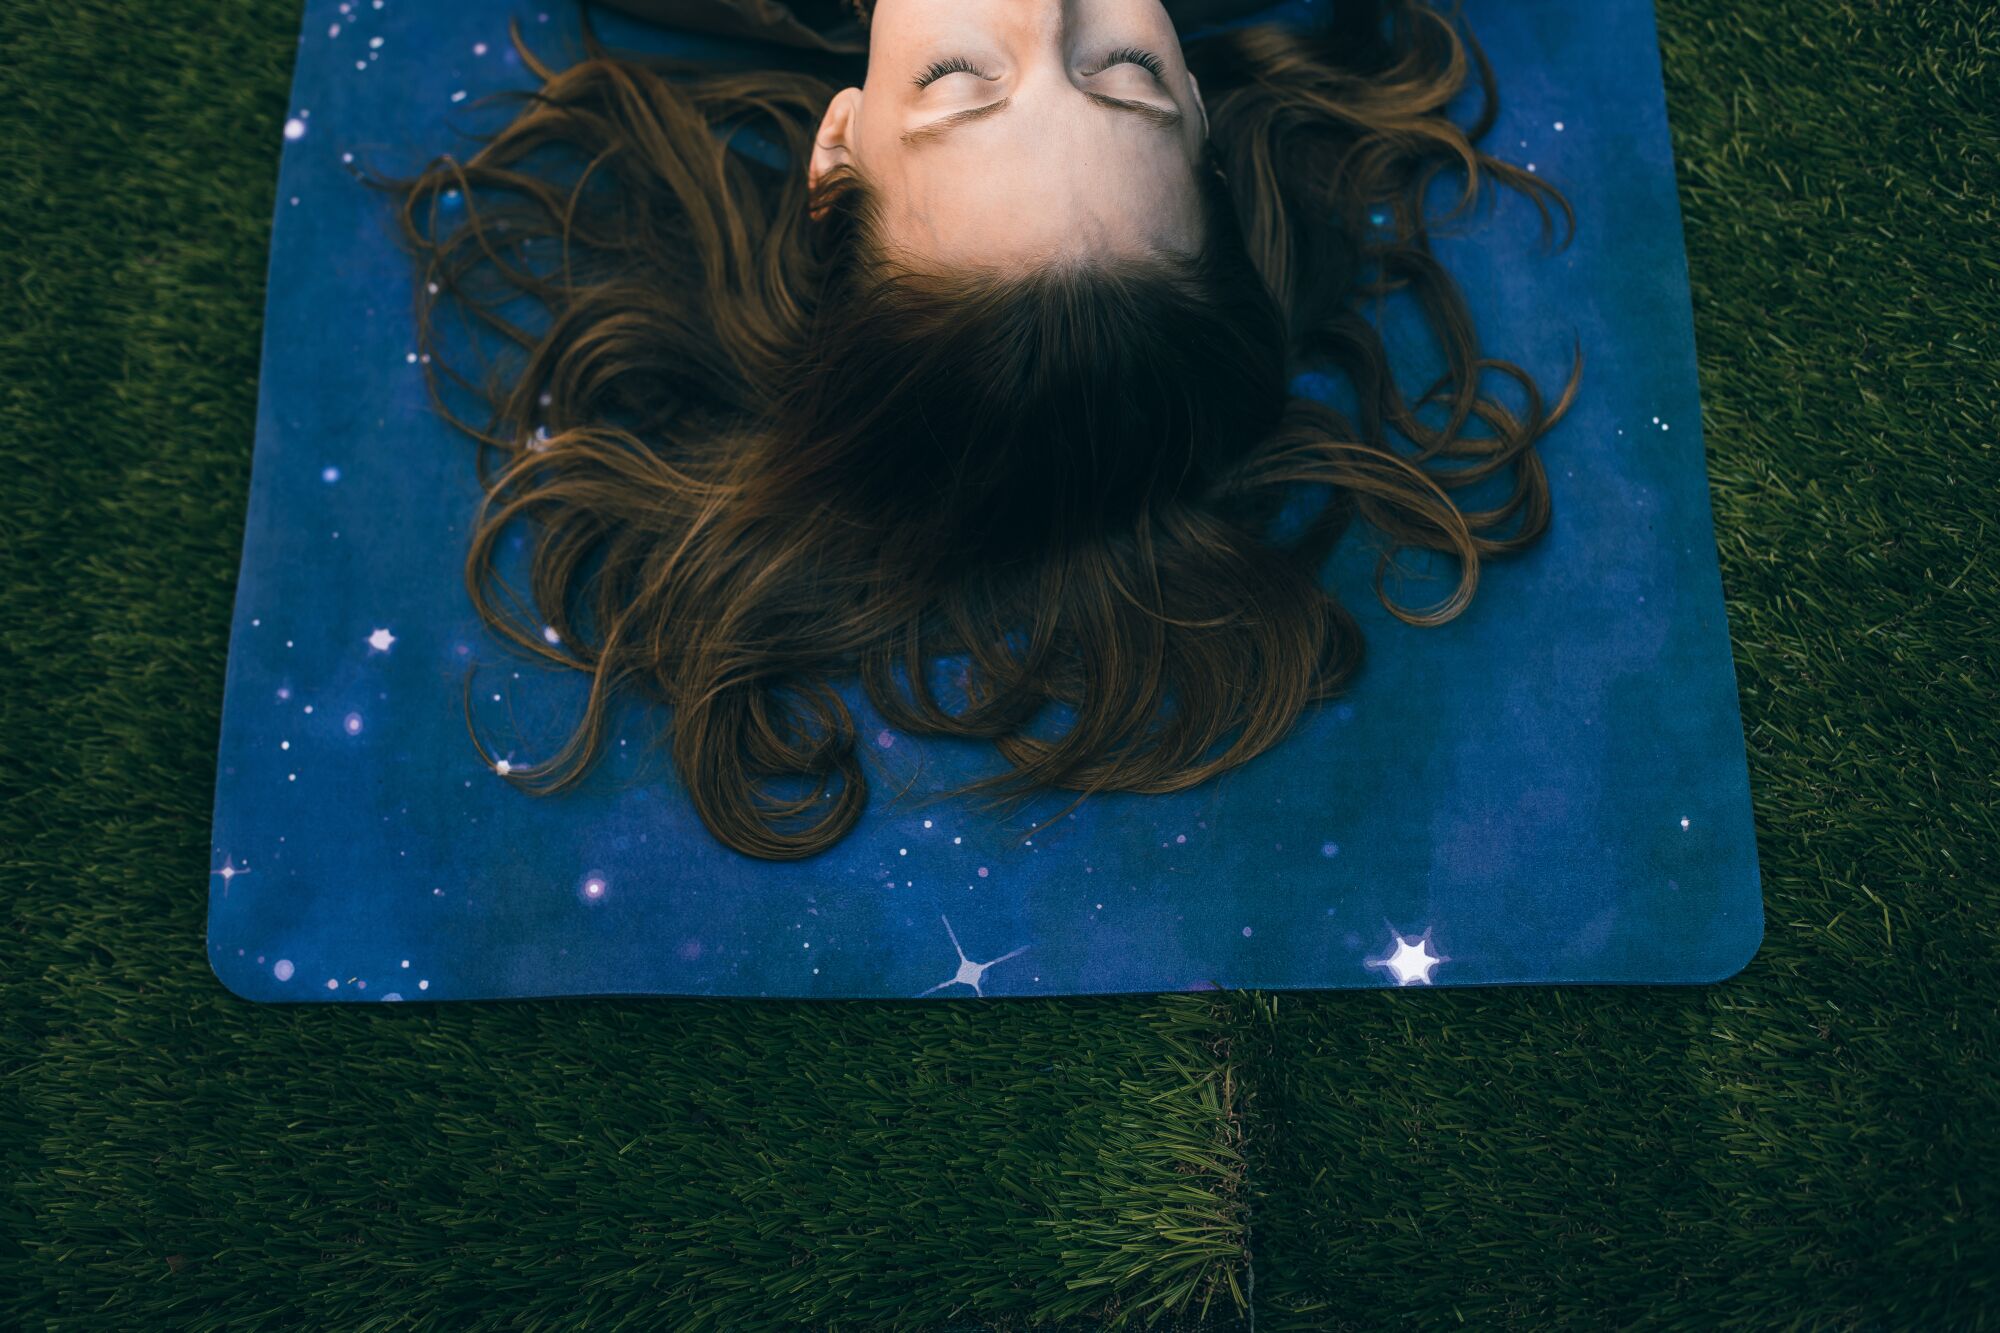 A view from above of a person lying on a galaxy-themed yoga mat on the grass, only their hair and top of their face visible